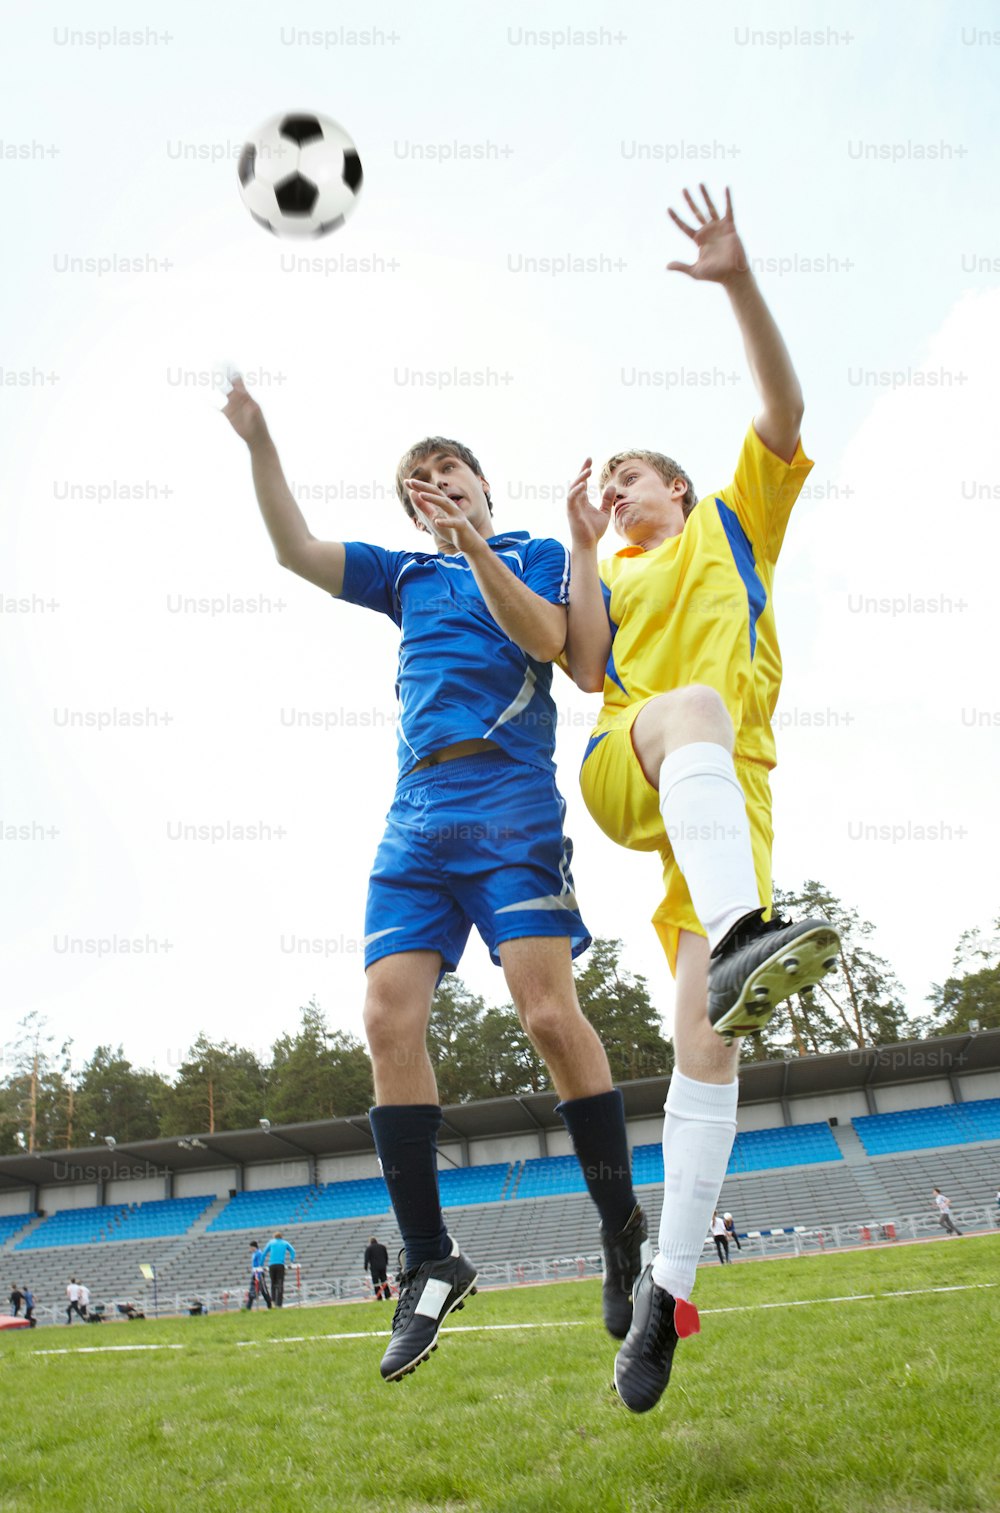 Two footballers jumping and looking at ball on grass-field during game